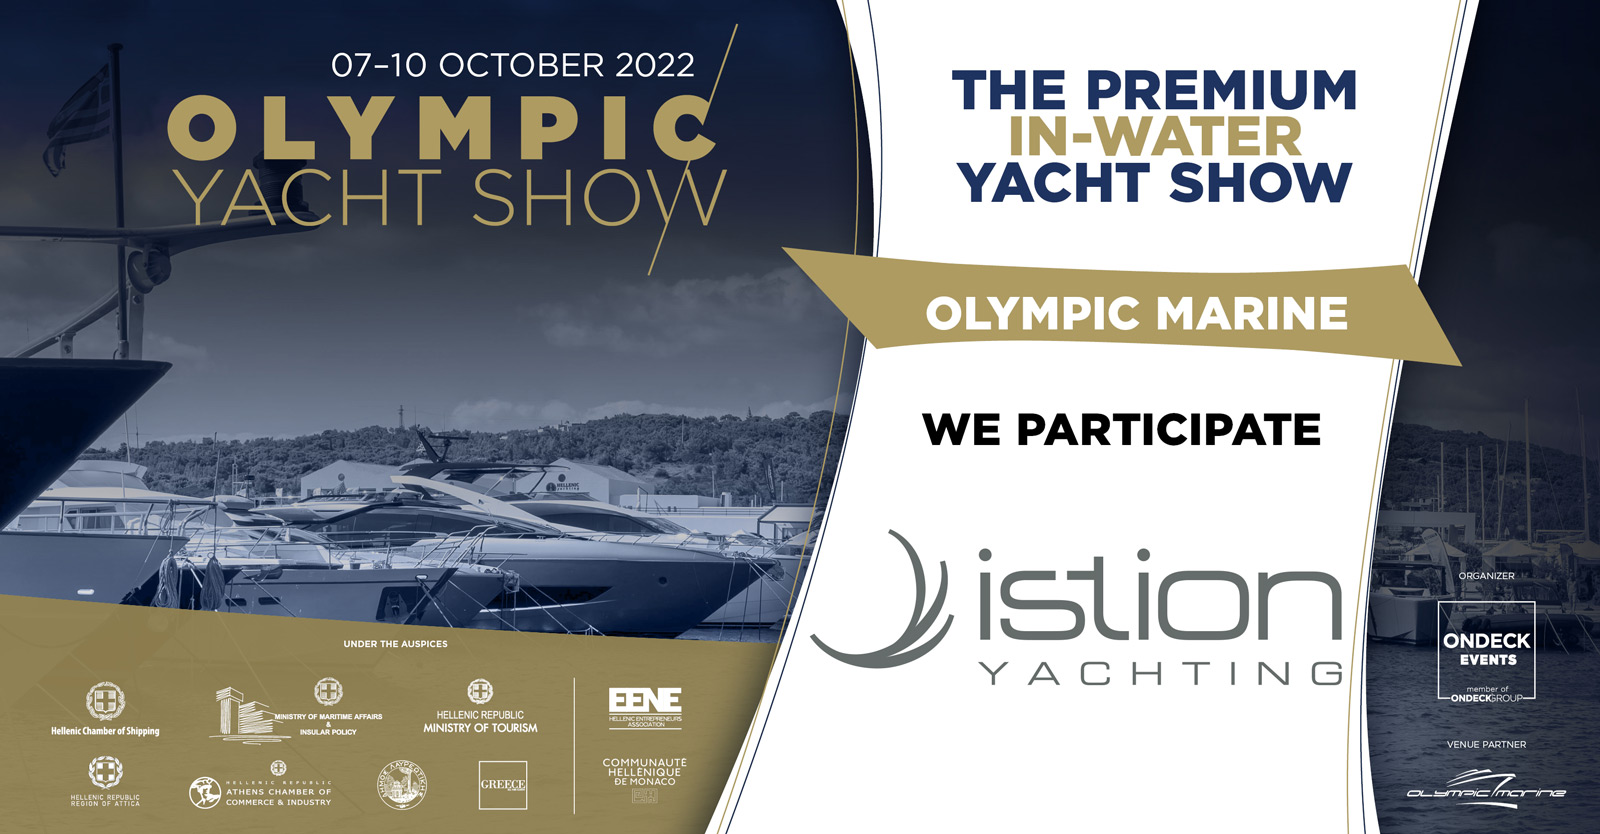 Istion Yachting